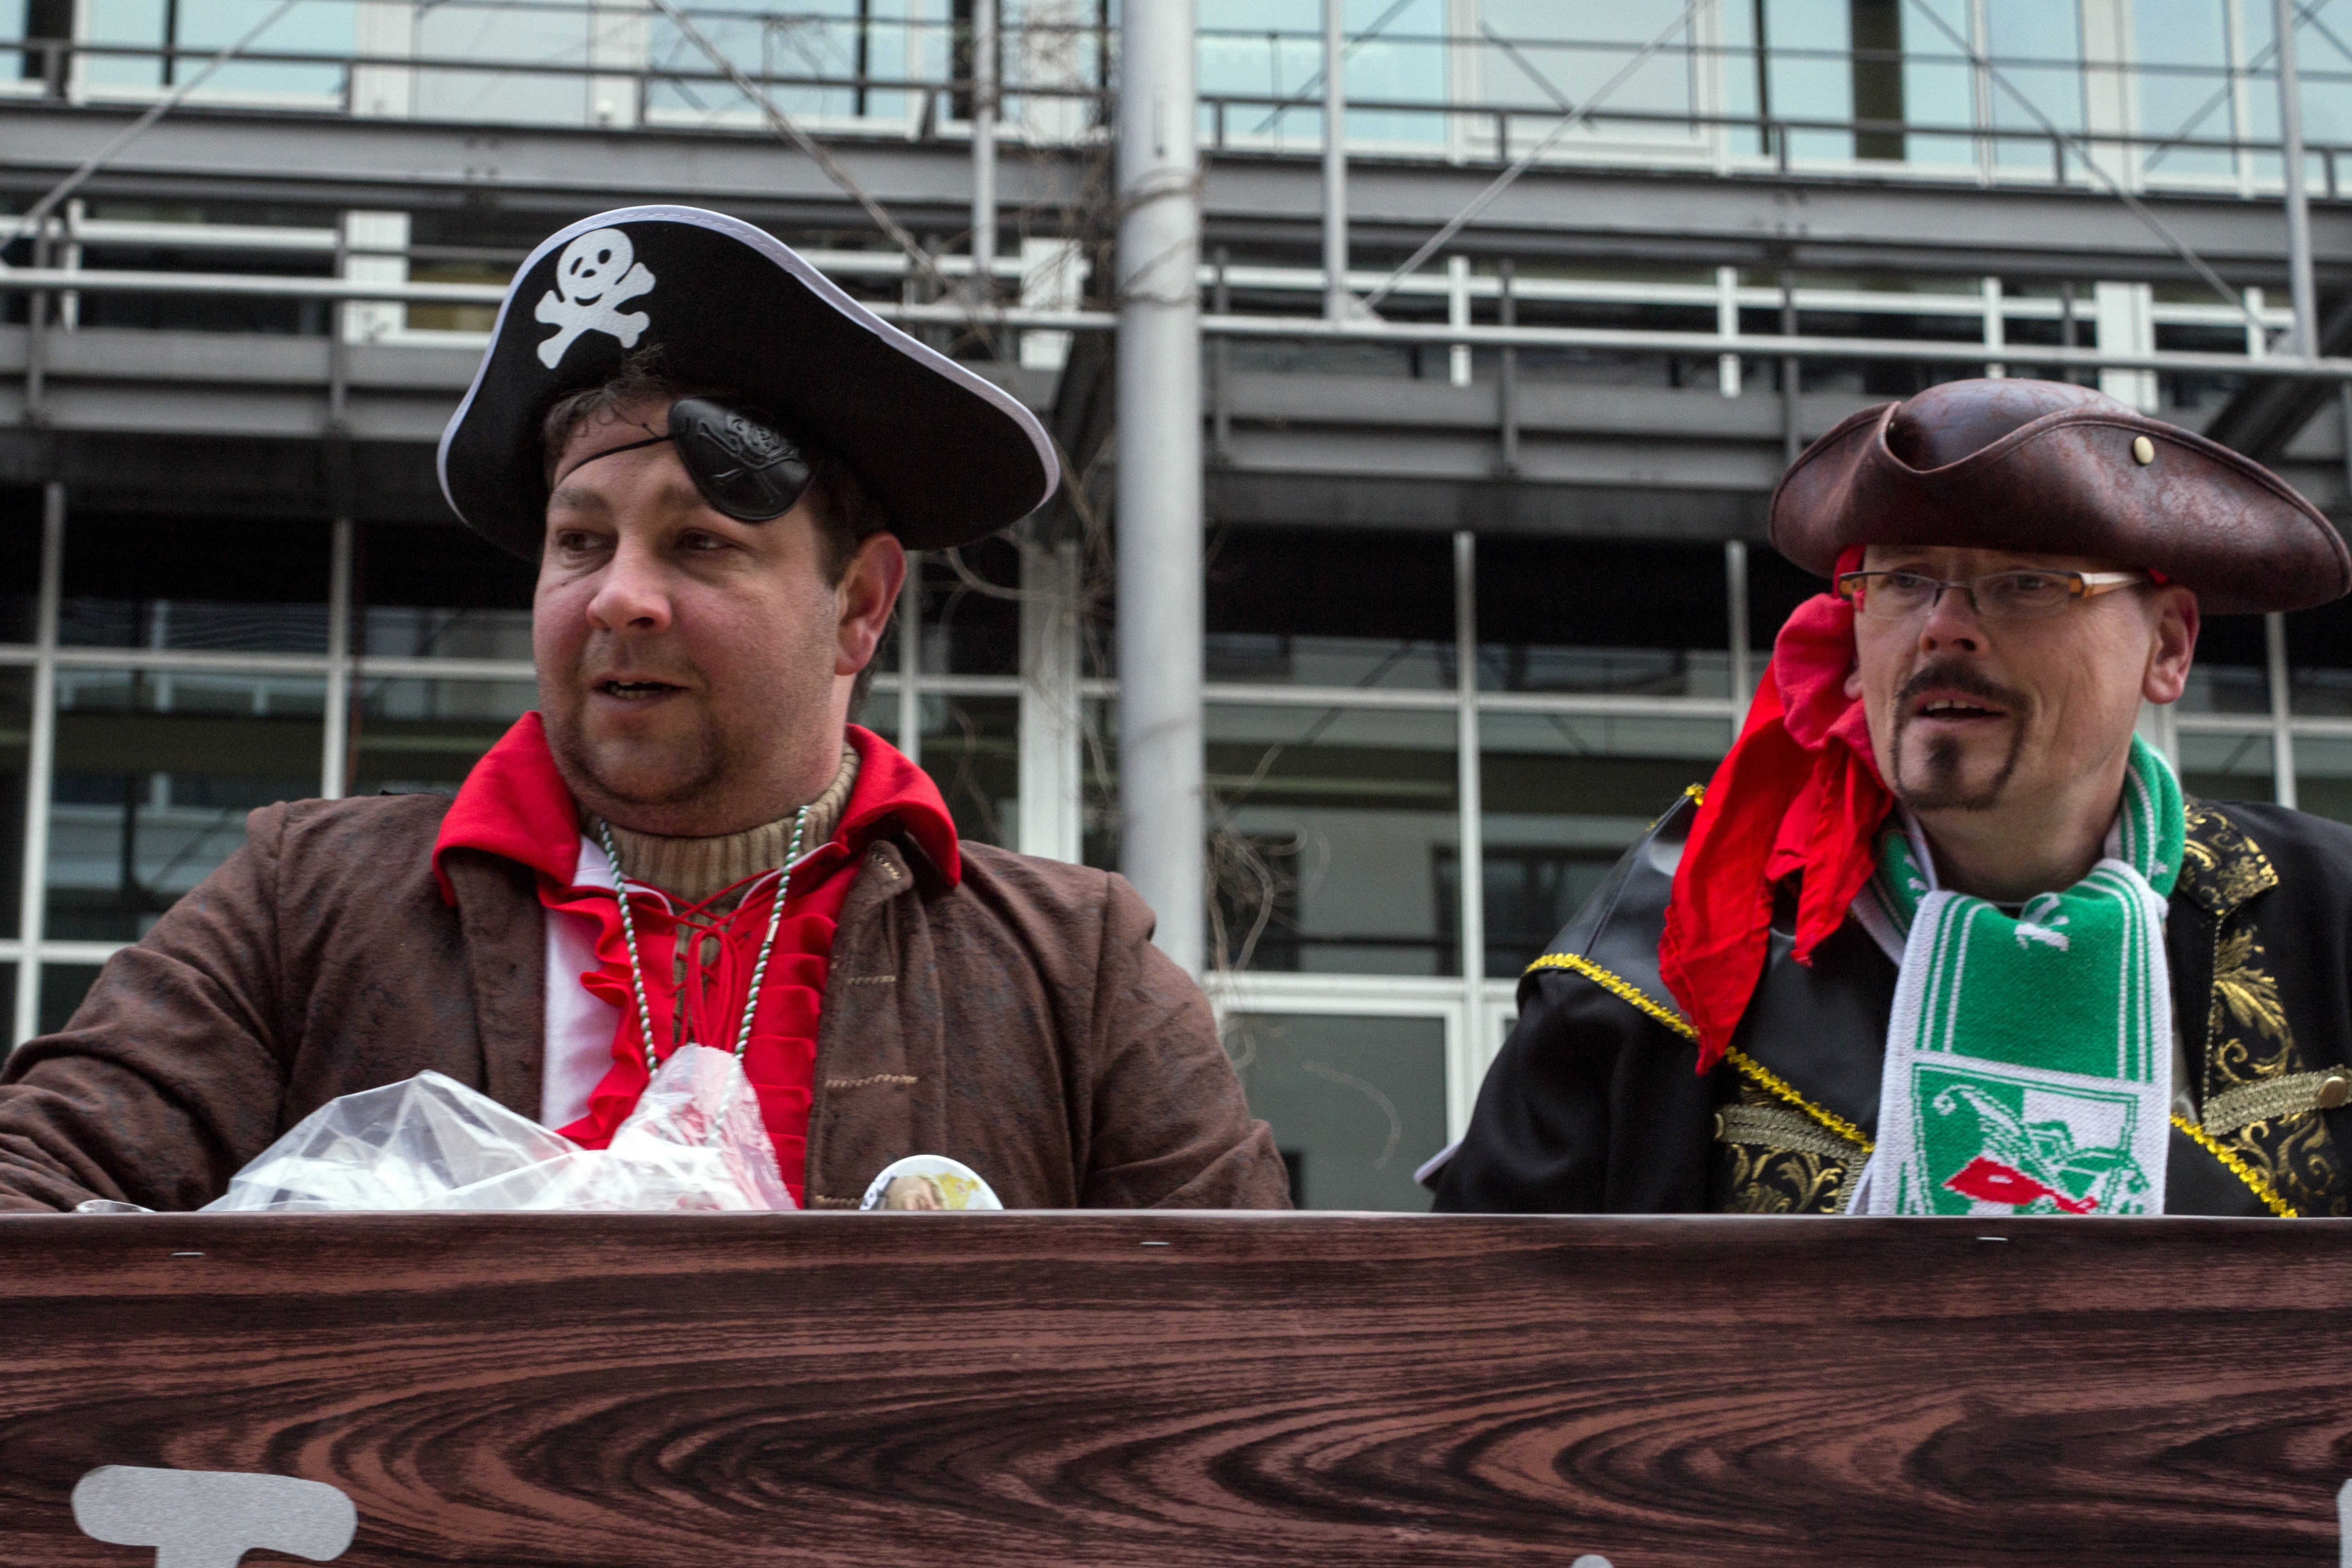 two pirate costumes